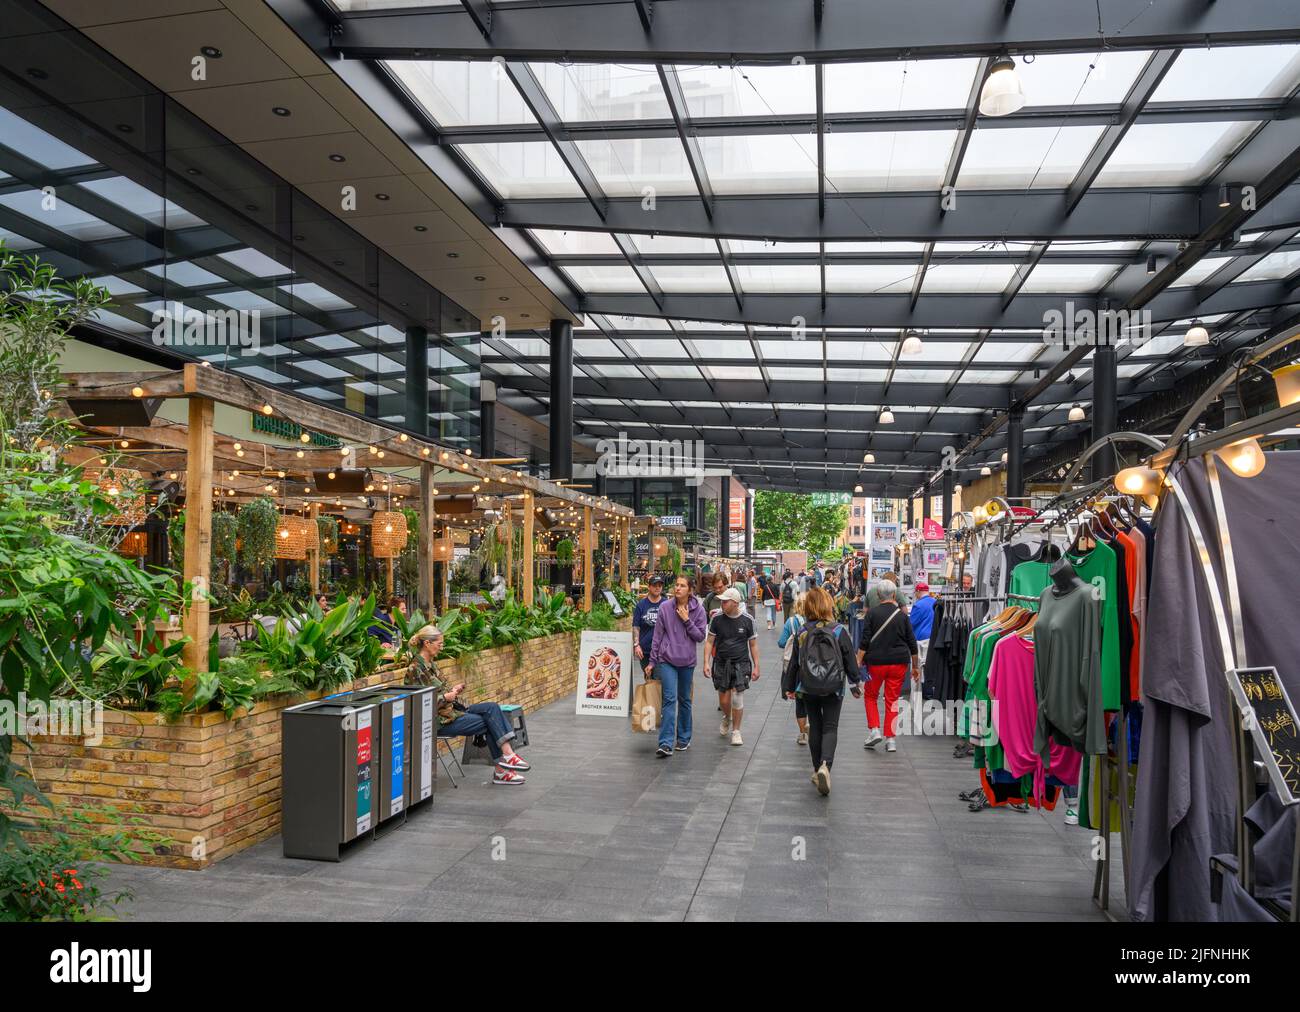 Stalls and restaurants in Old Spitalfields Market, Tower Hamlets, East End, London, England, UK Stock Photo